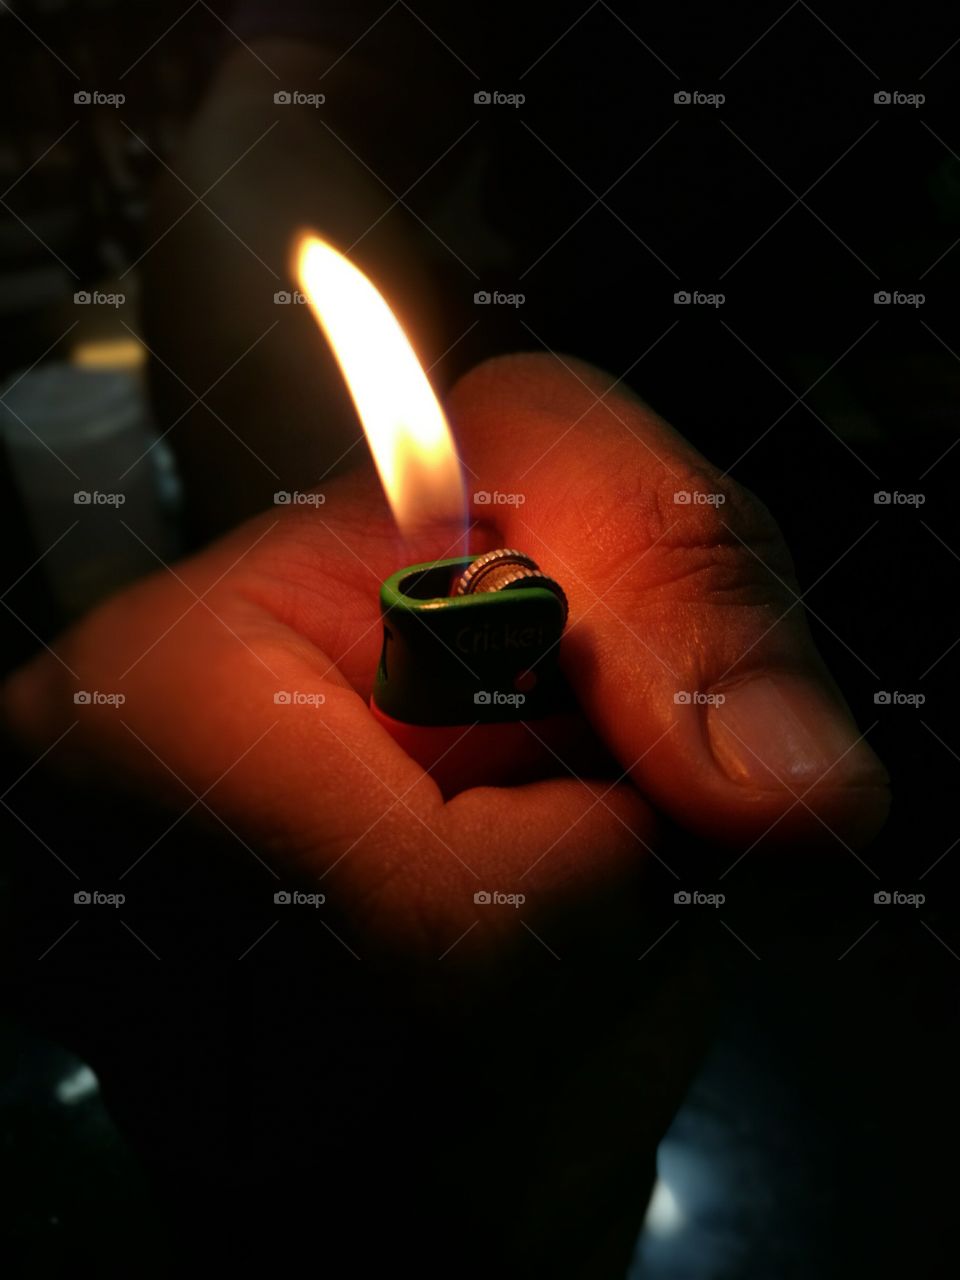 Flame produced from a lighter